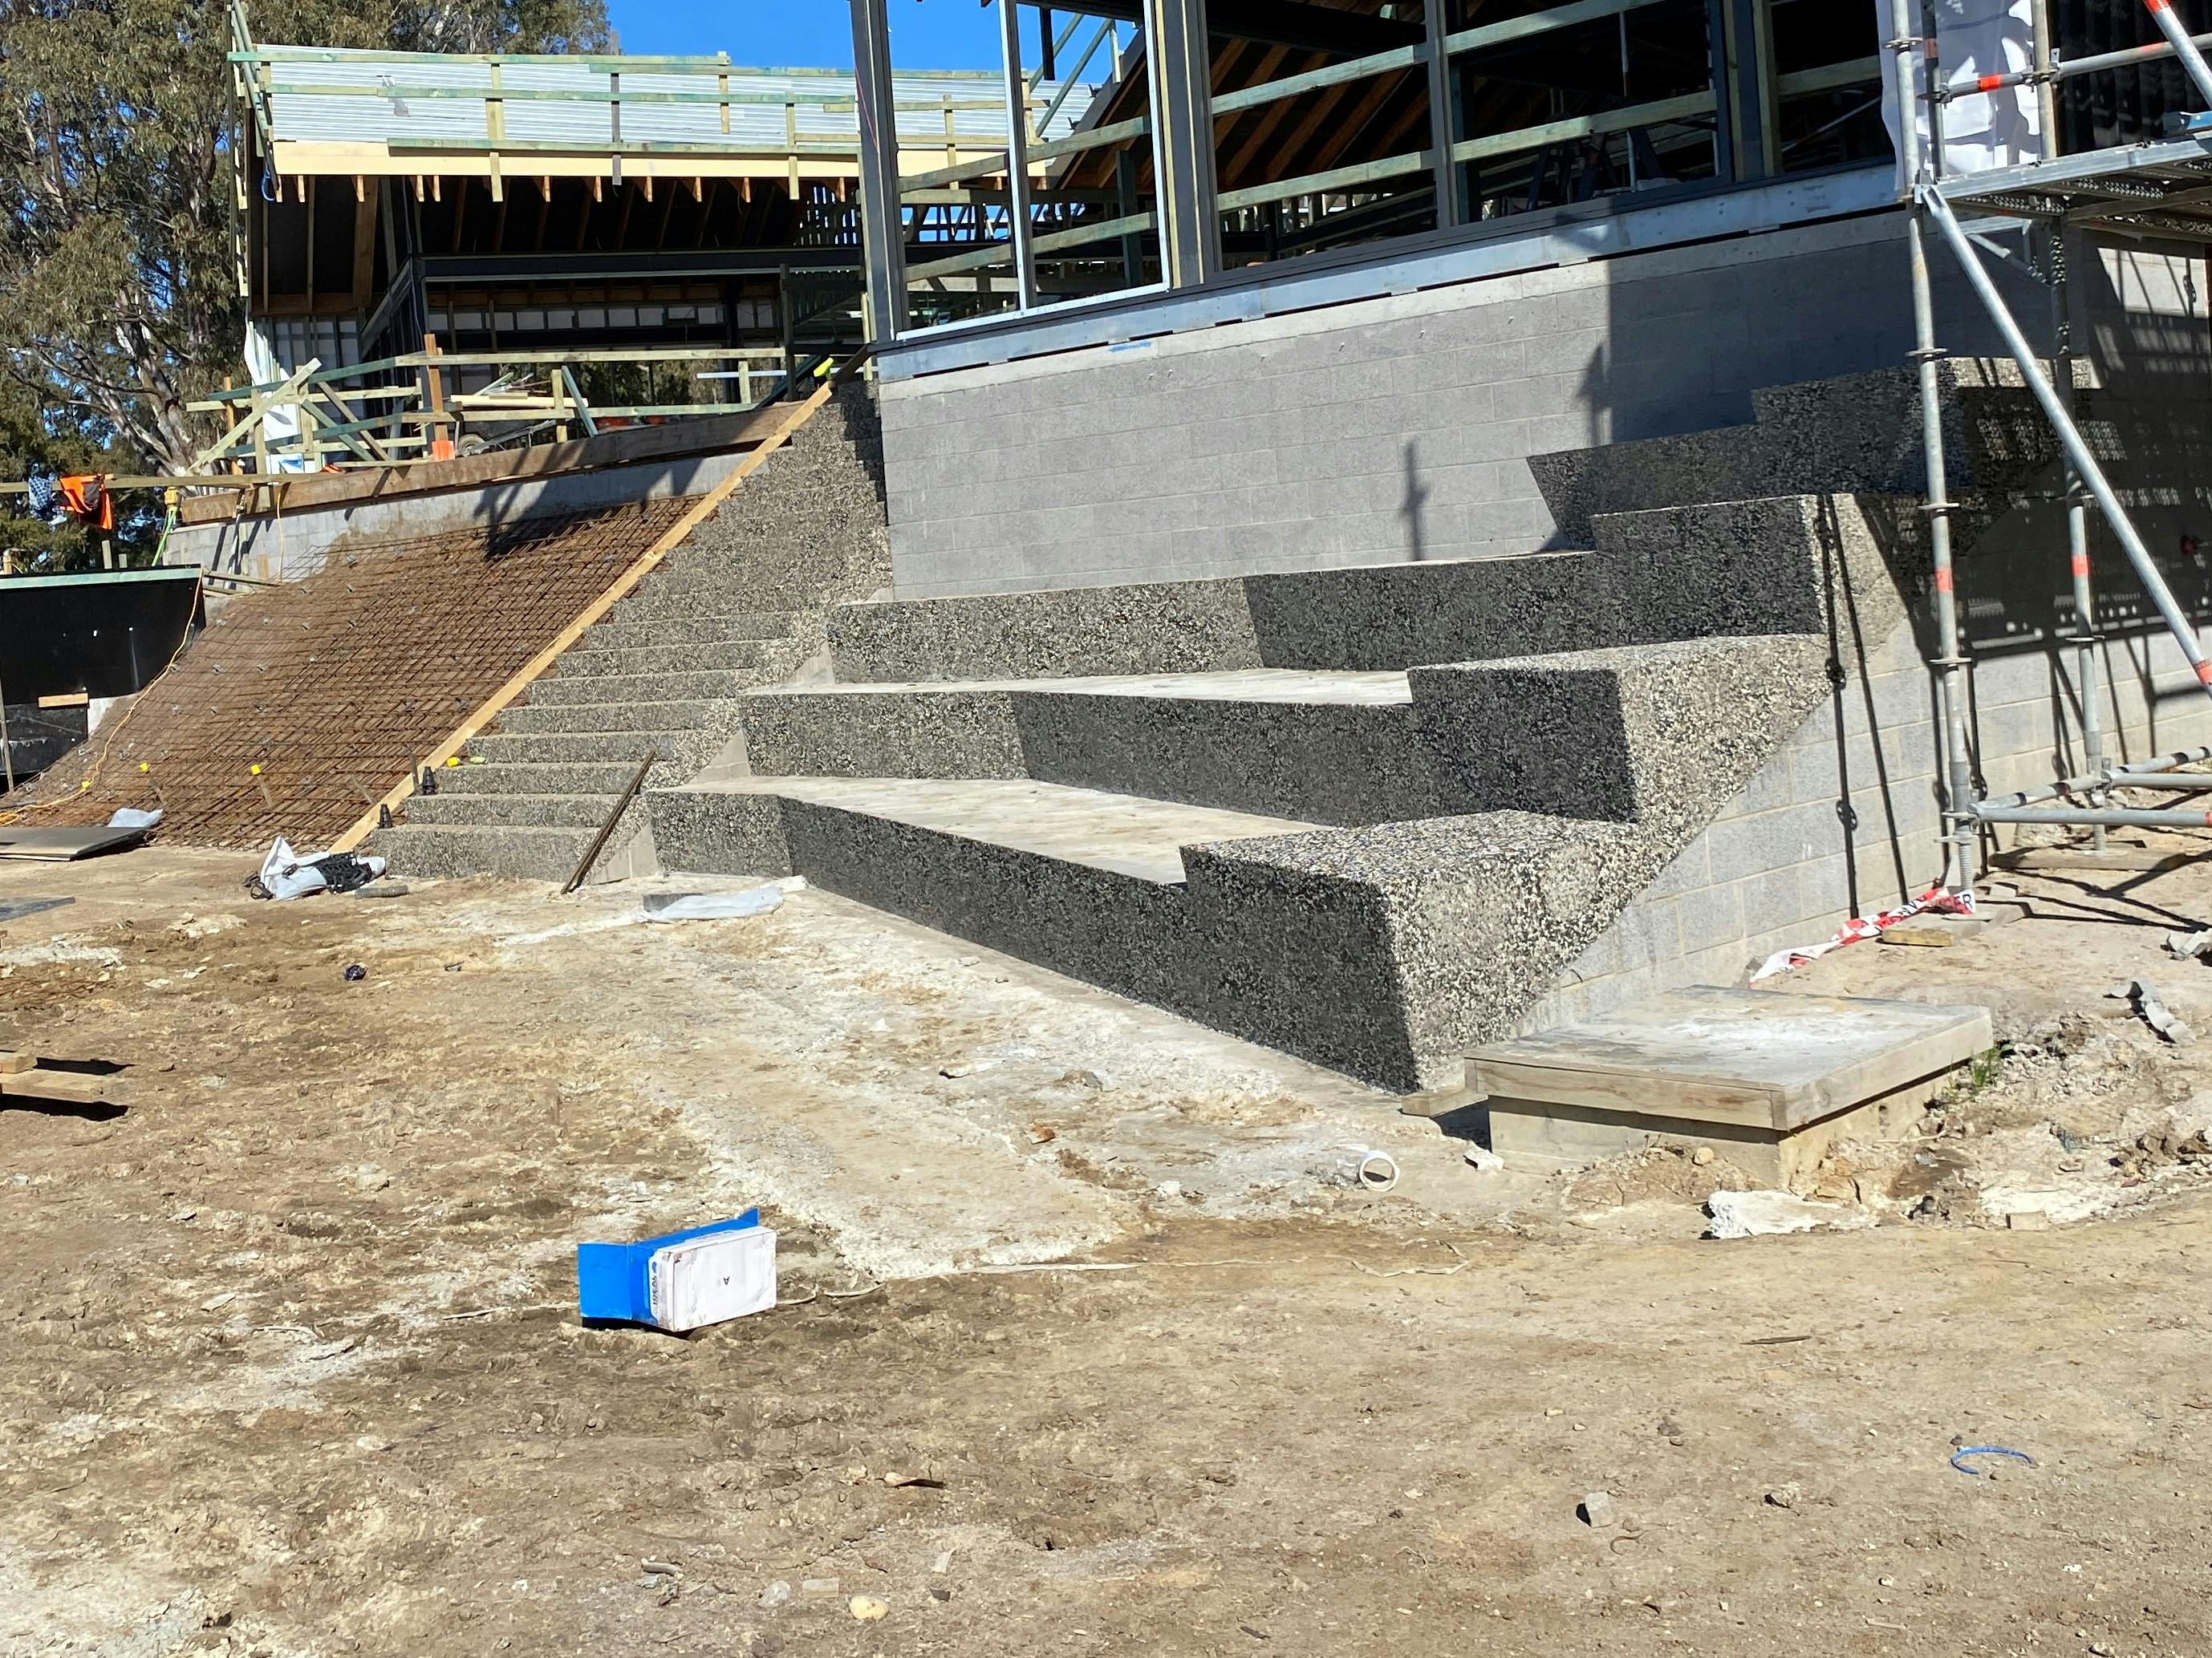 Bleacher seating underway. Handrails will be installed on the steps leading up to the building